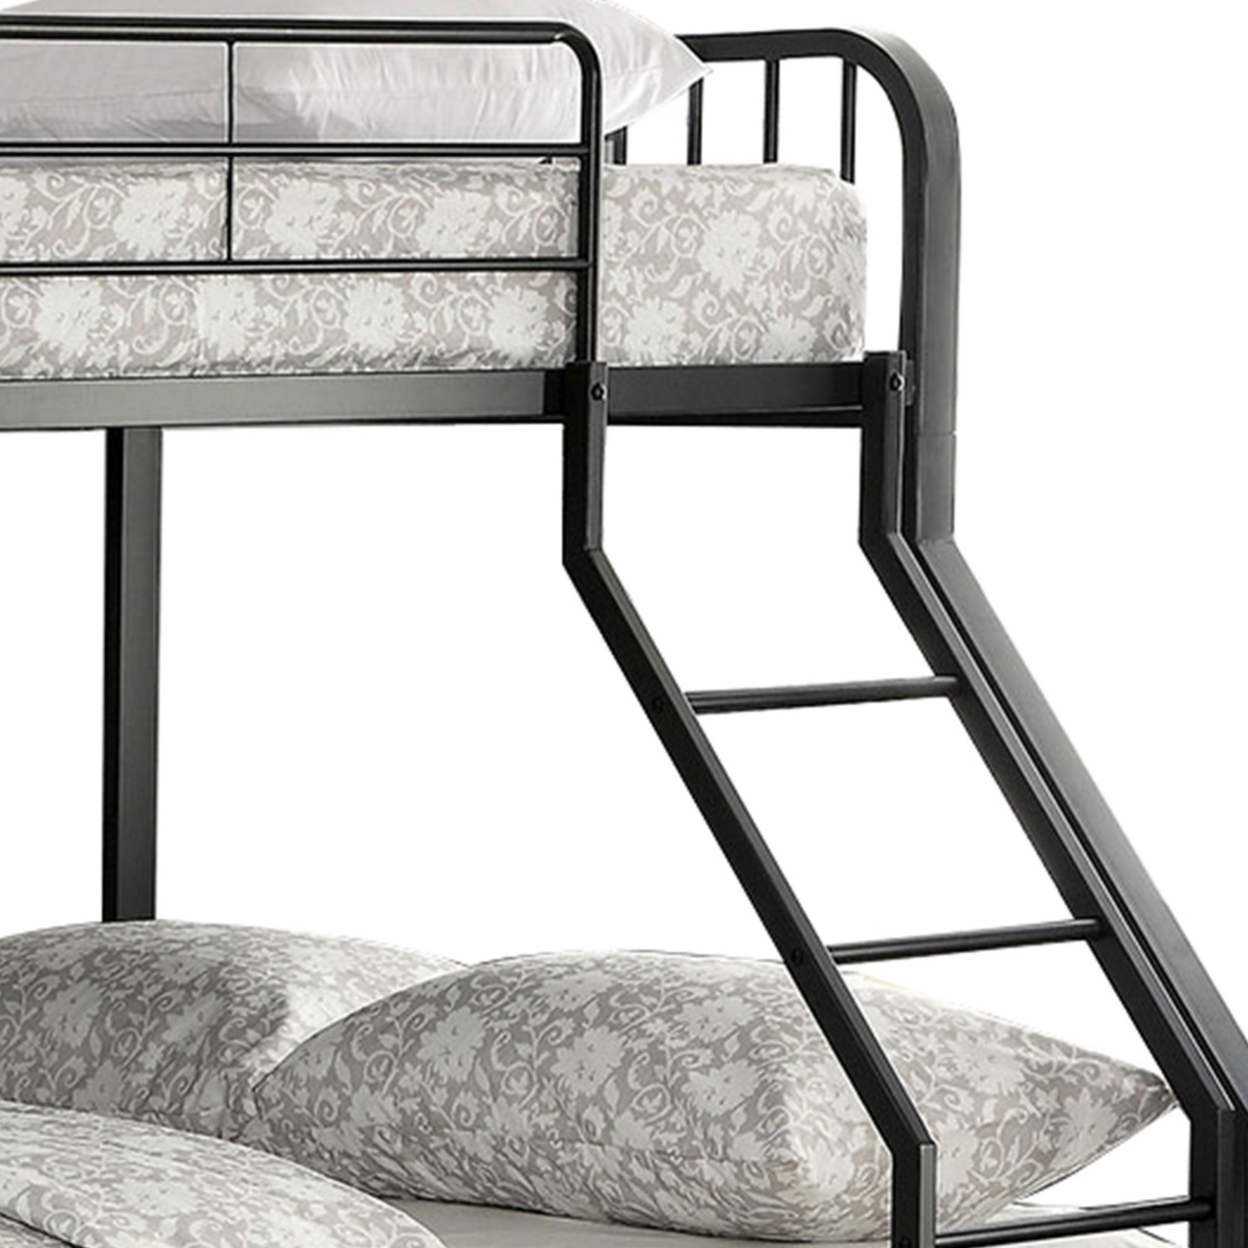 Industrial Style Twin Over Full Metal Bunk Bed With Tubular Frame, Black- Saltoro Sherpi